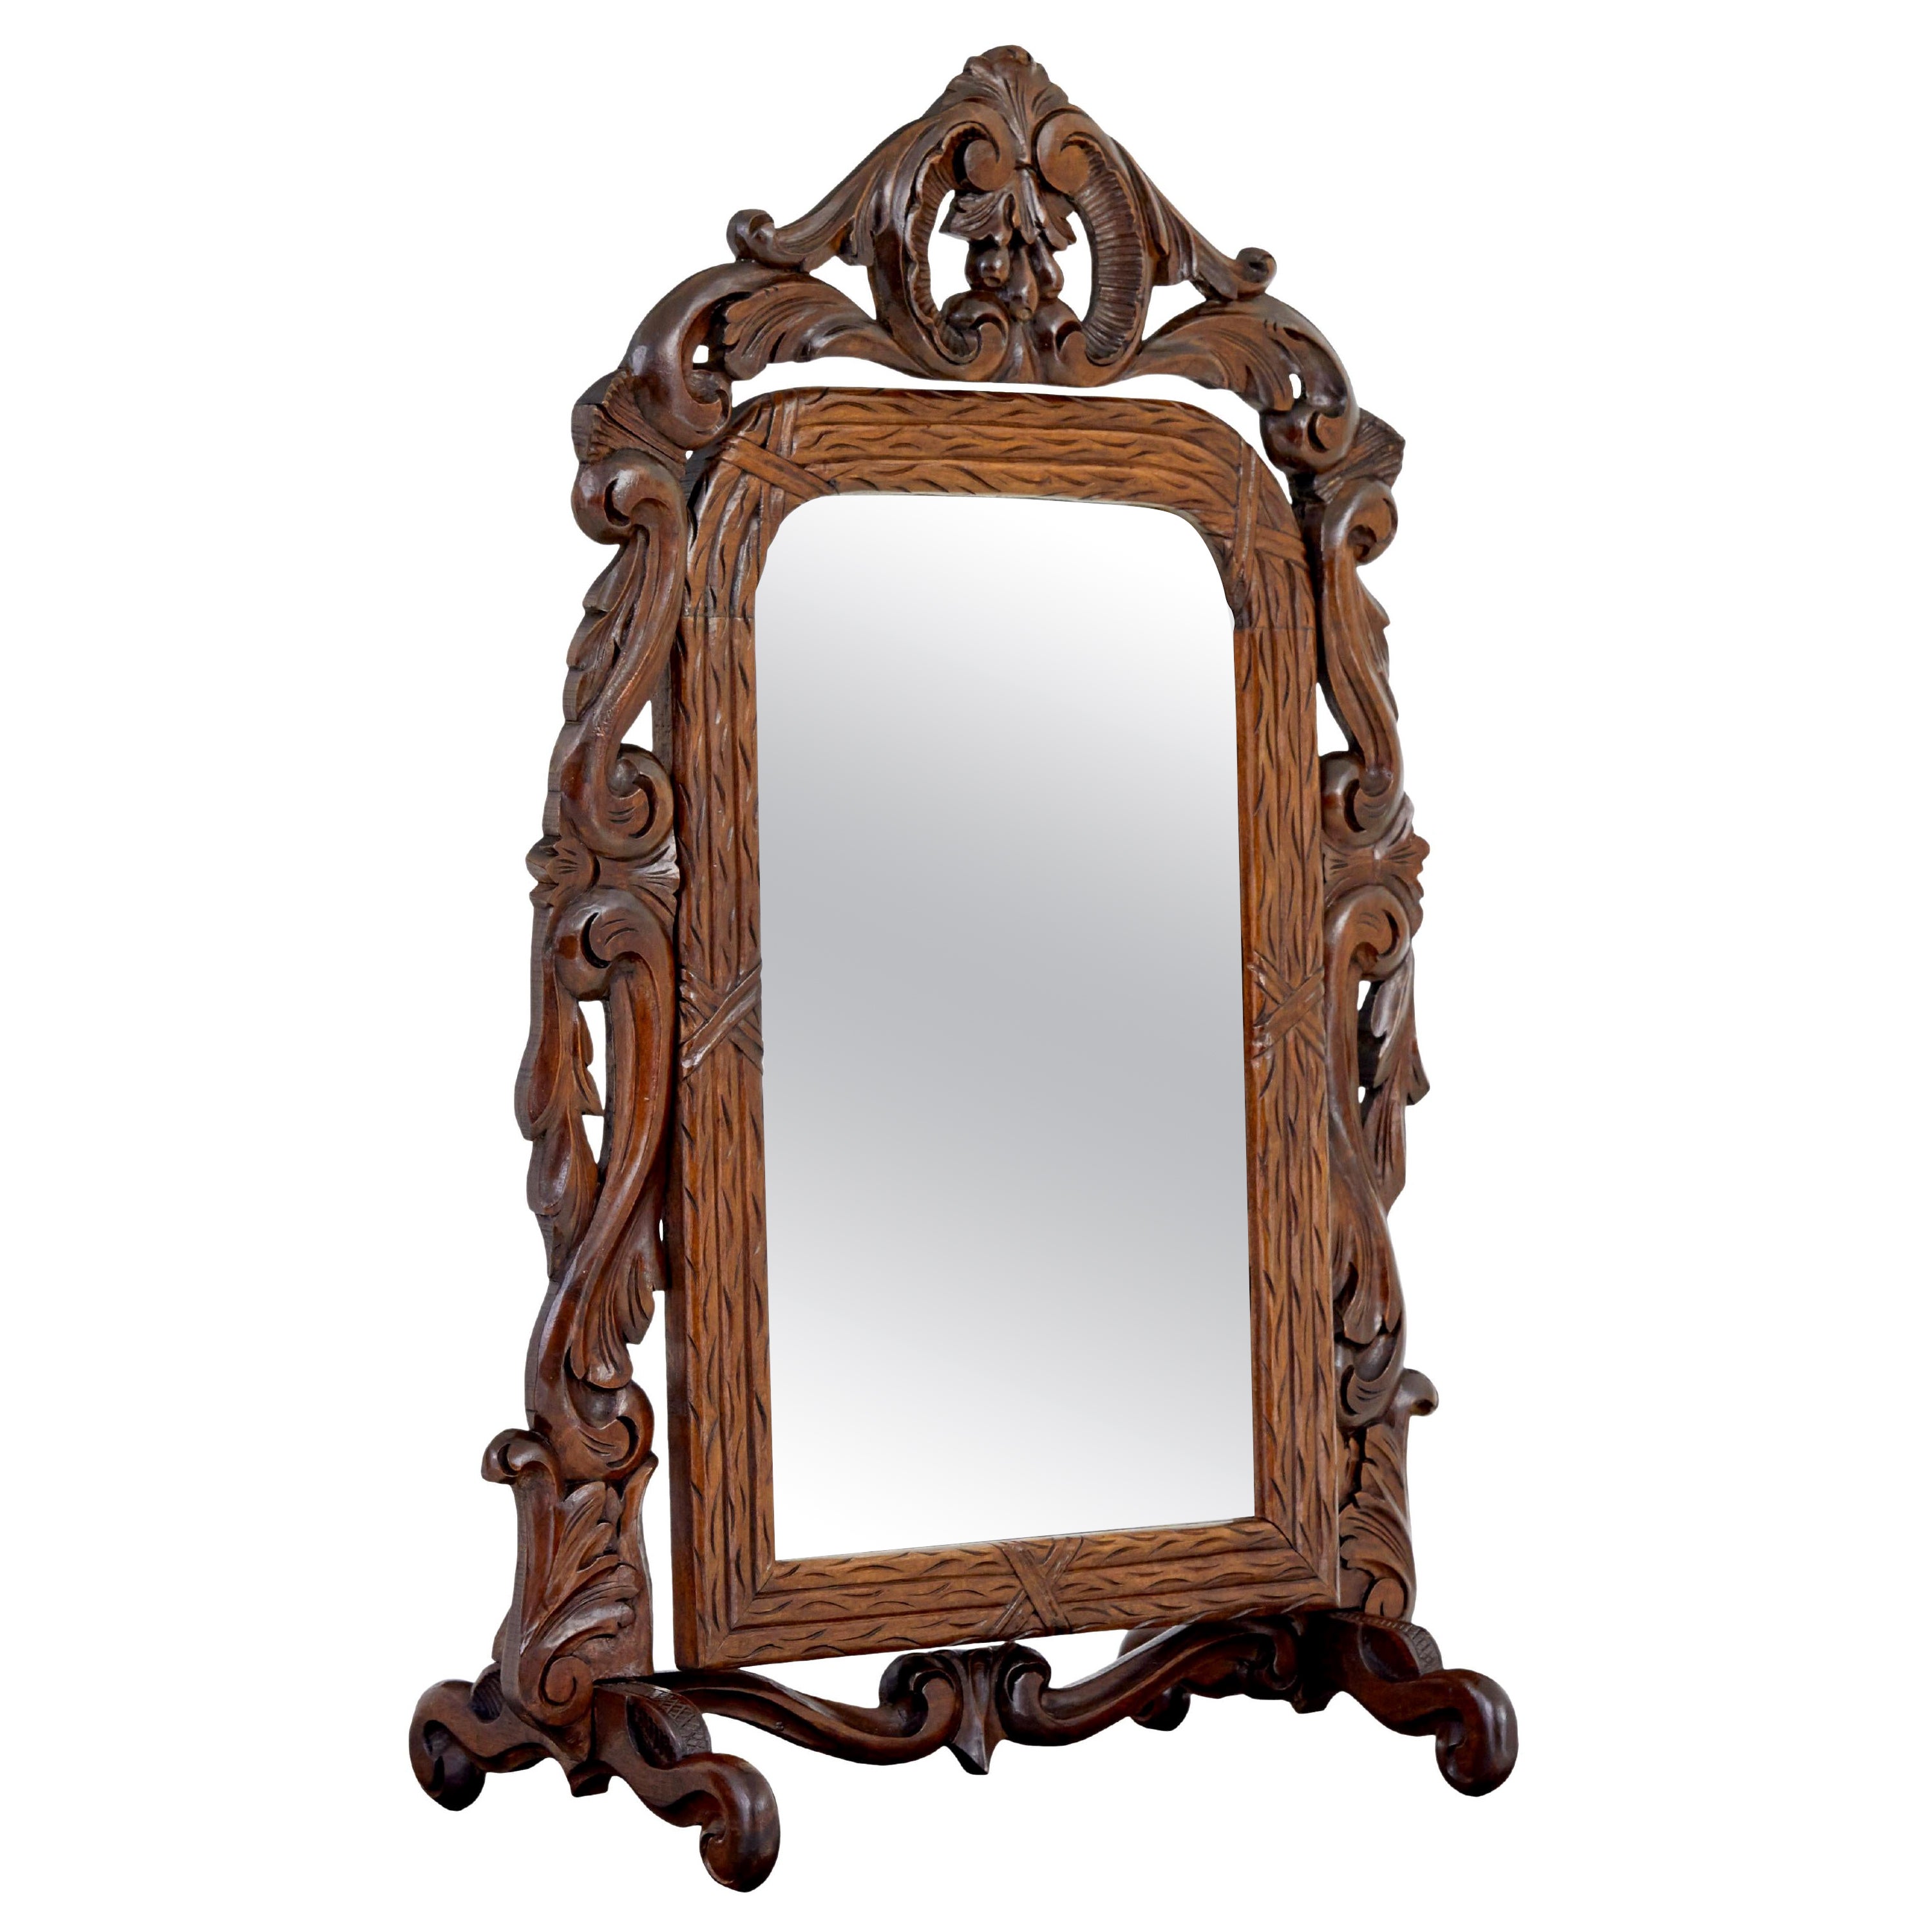 Late 19th century carved oak rococo revival vanity mirror For Sale